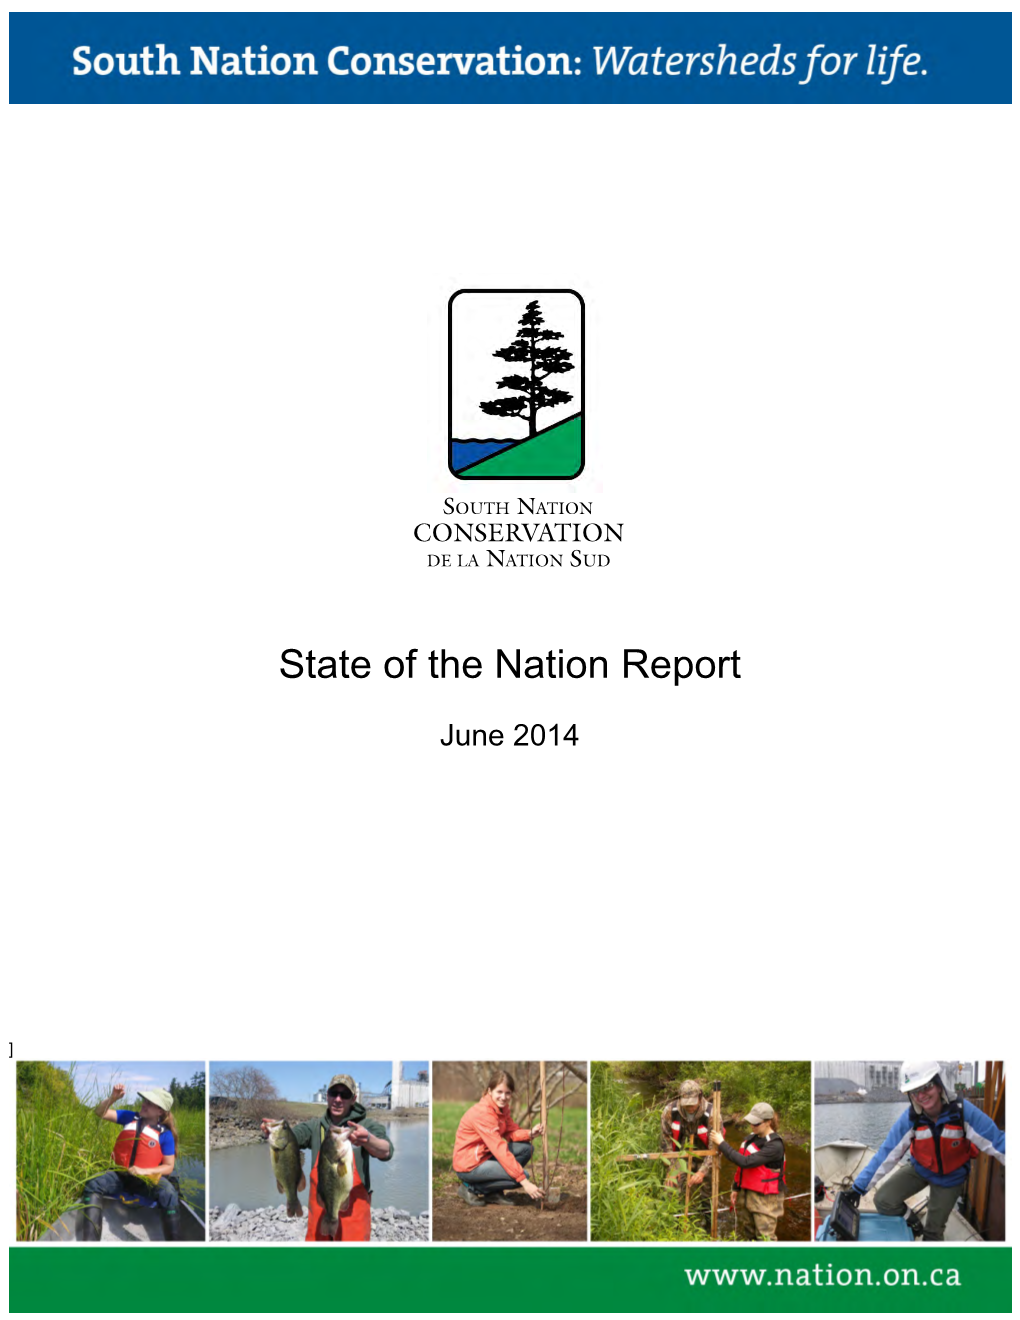 State of the Nation Report (2014) Summarizes Results and Recommendations on Forest, Wetland and River Conditions Within South Nation Conservation’S (SNC) Jurisdiction